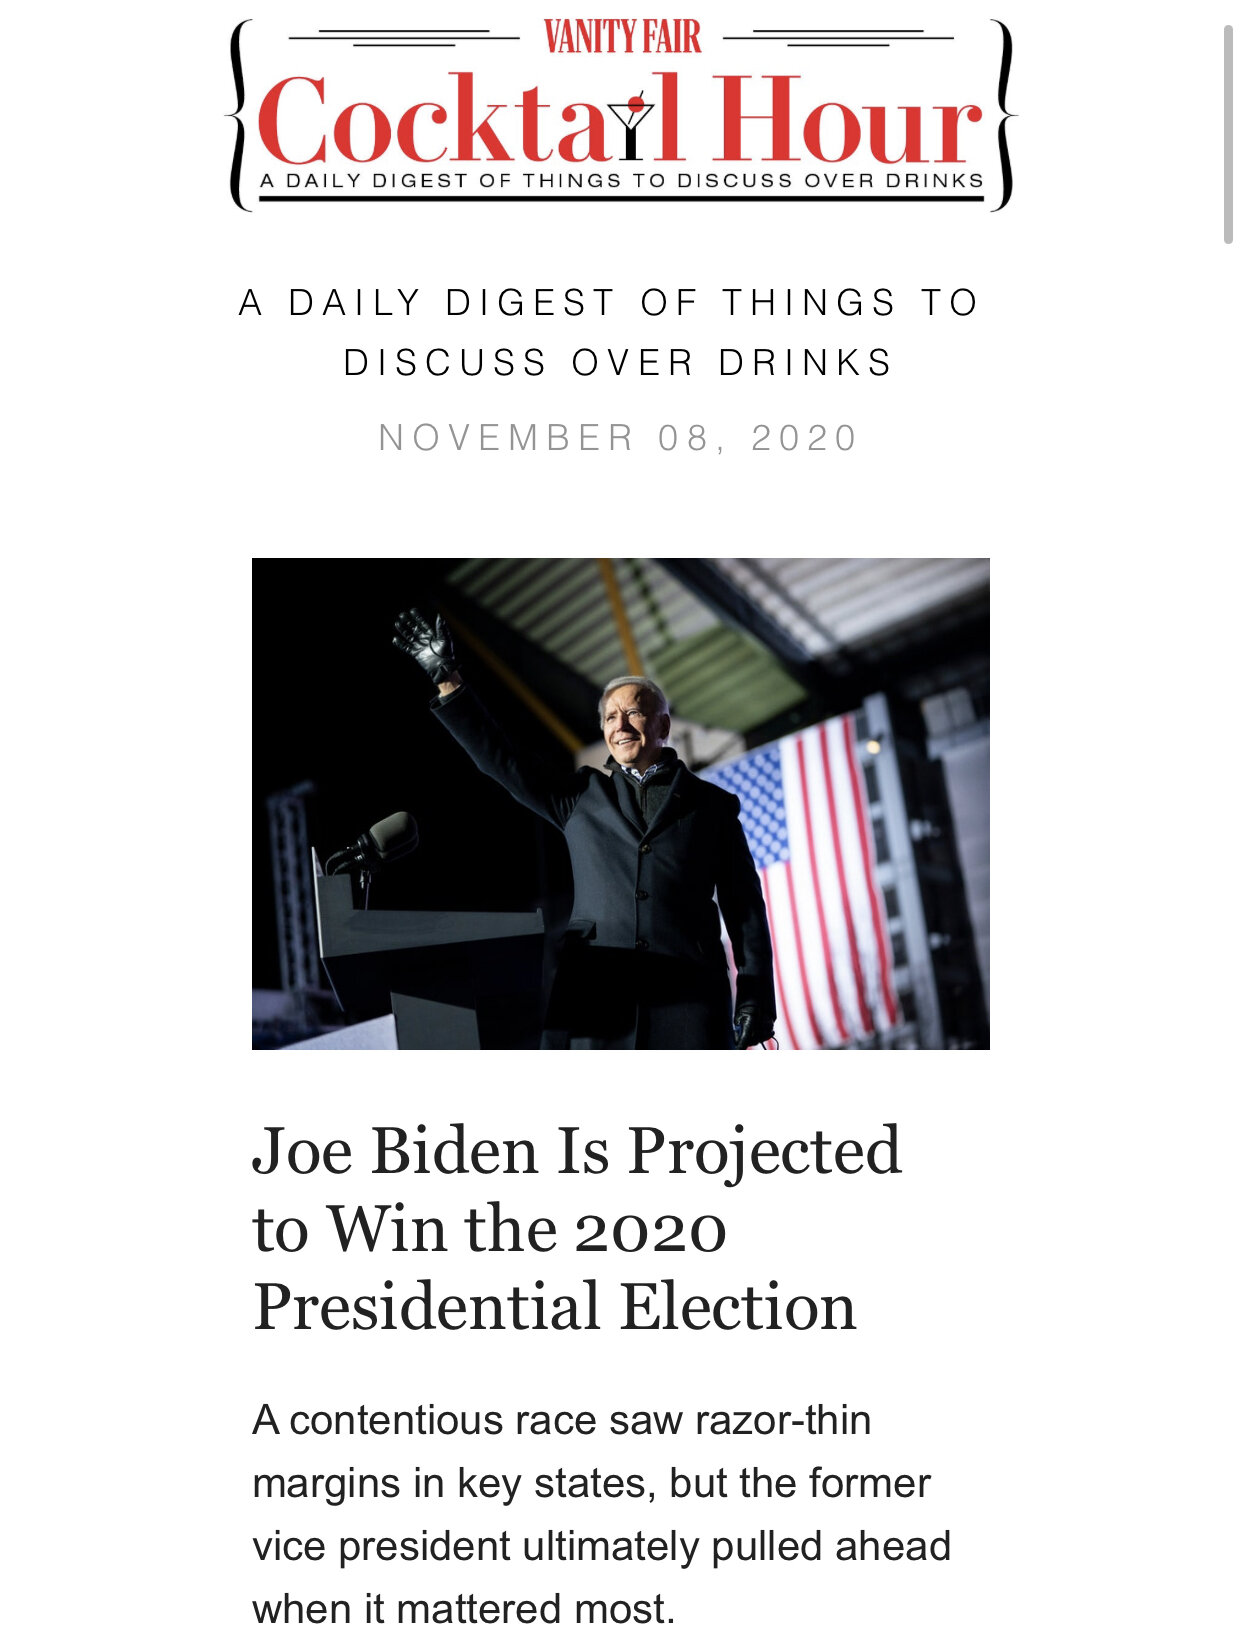 Election 2020 covers-7.jpg